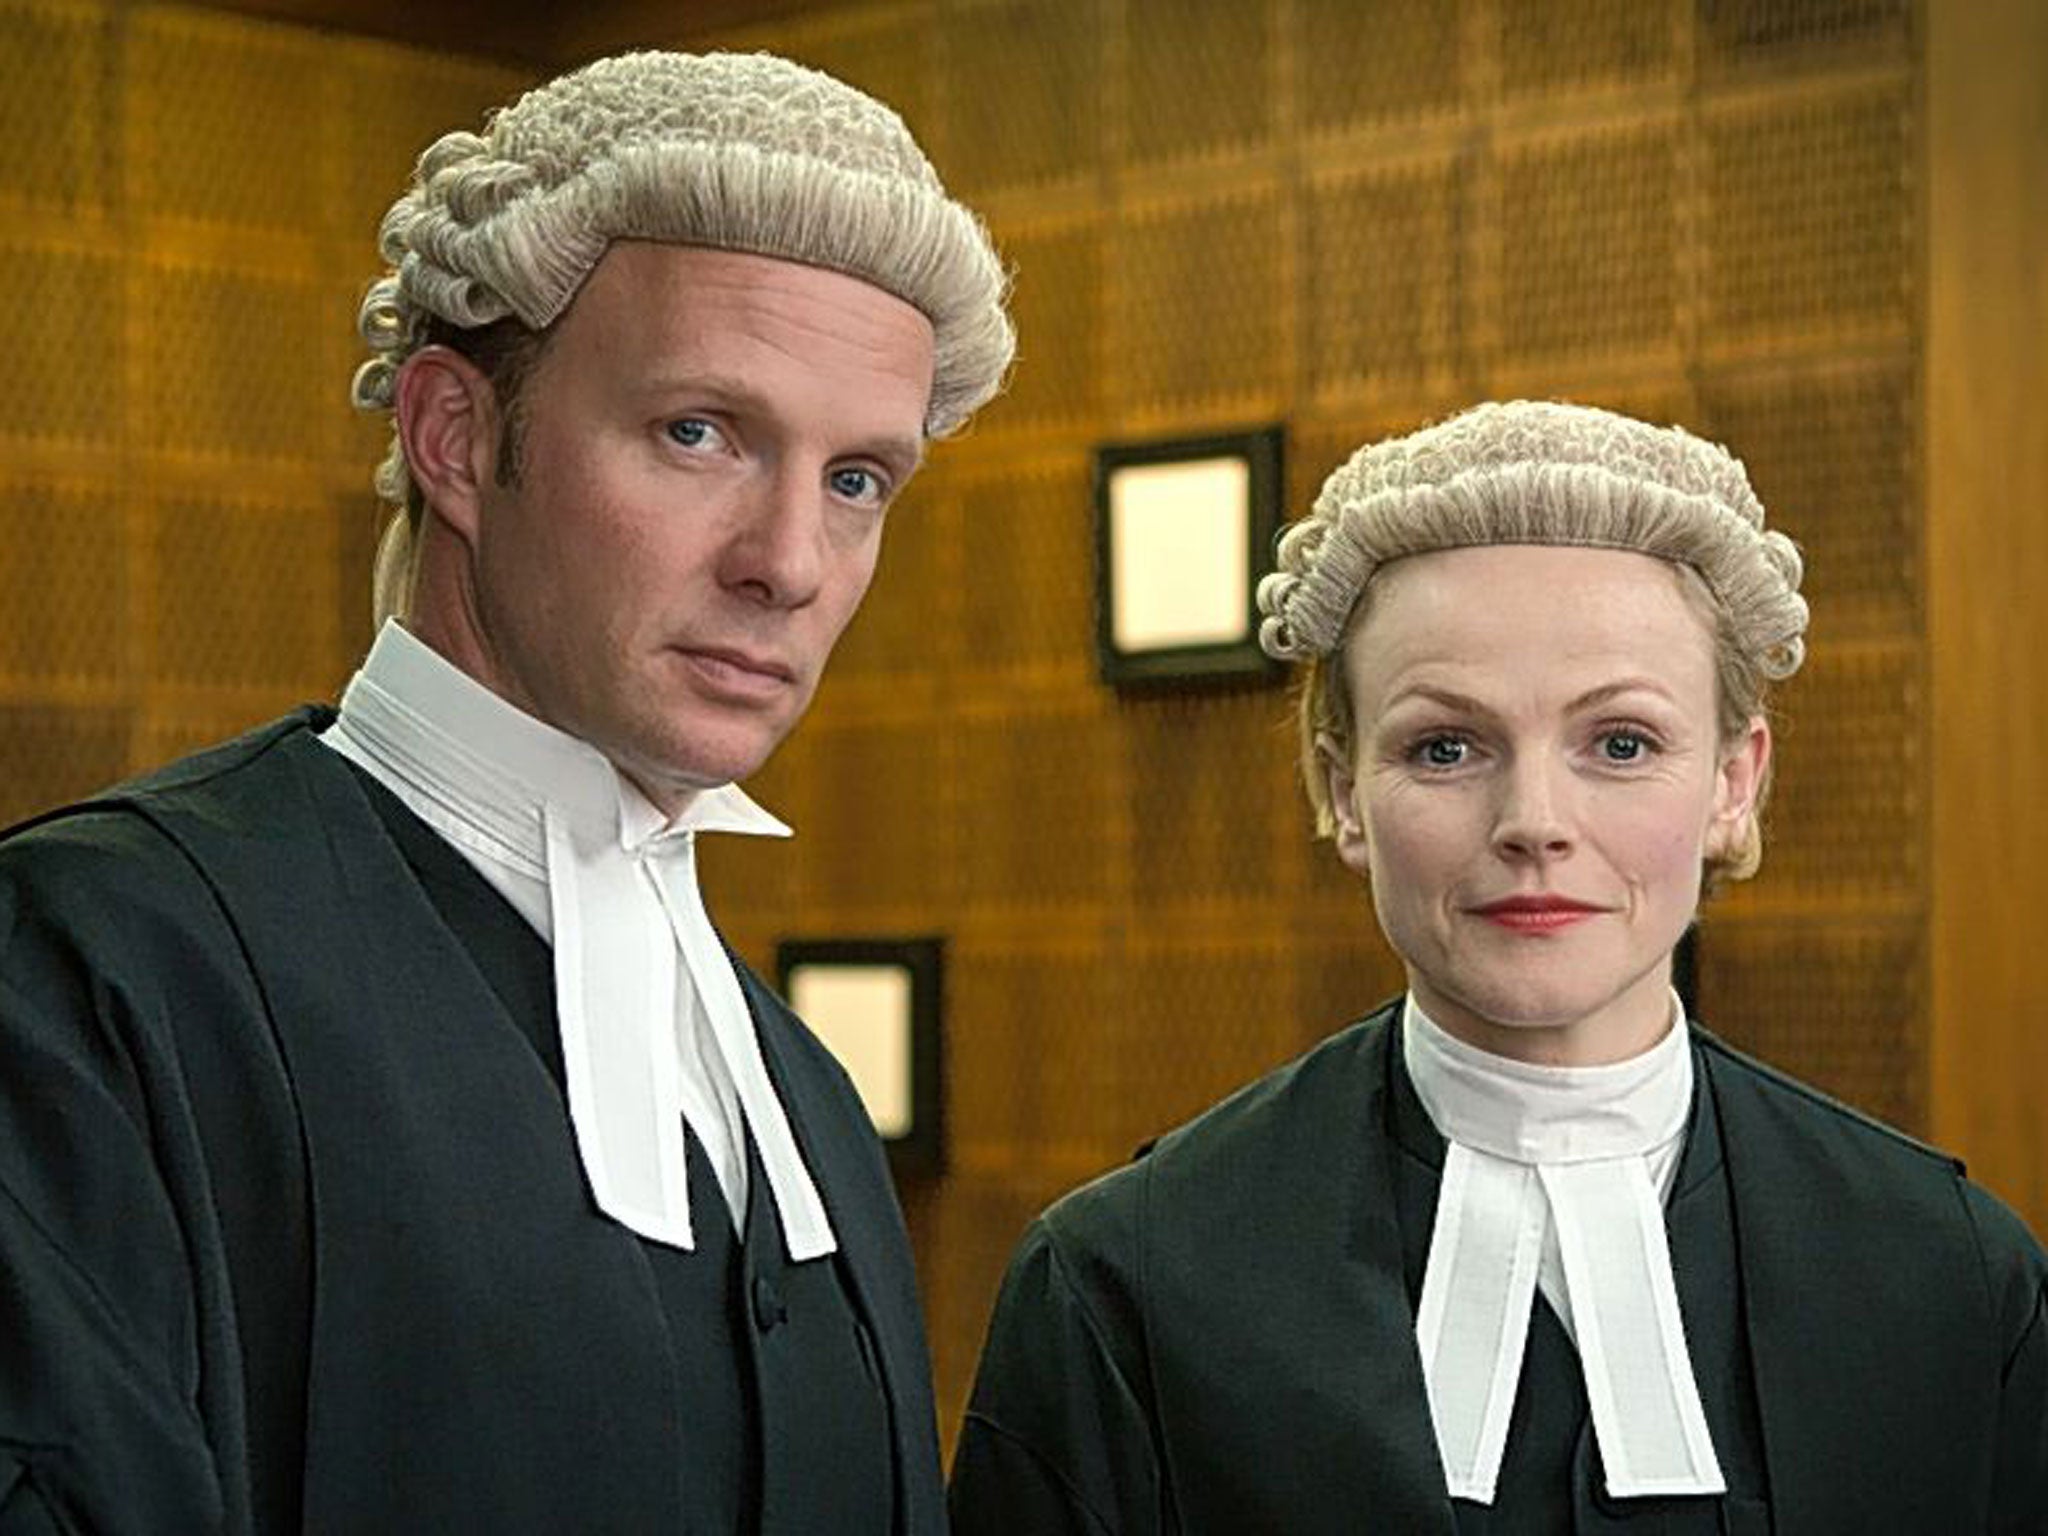 Rupert Penry-Jones, with Maxine Peake in ‘Silk’, feared becoming typecast playing chiselled good guys